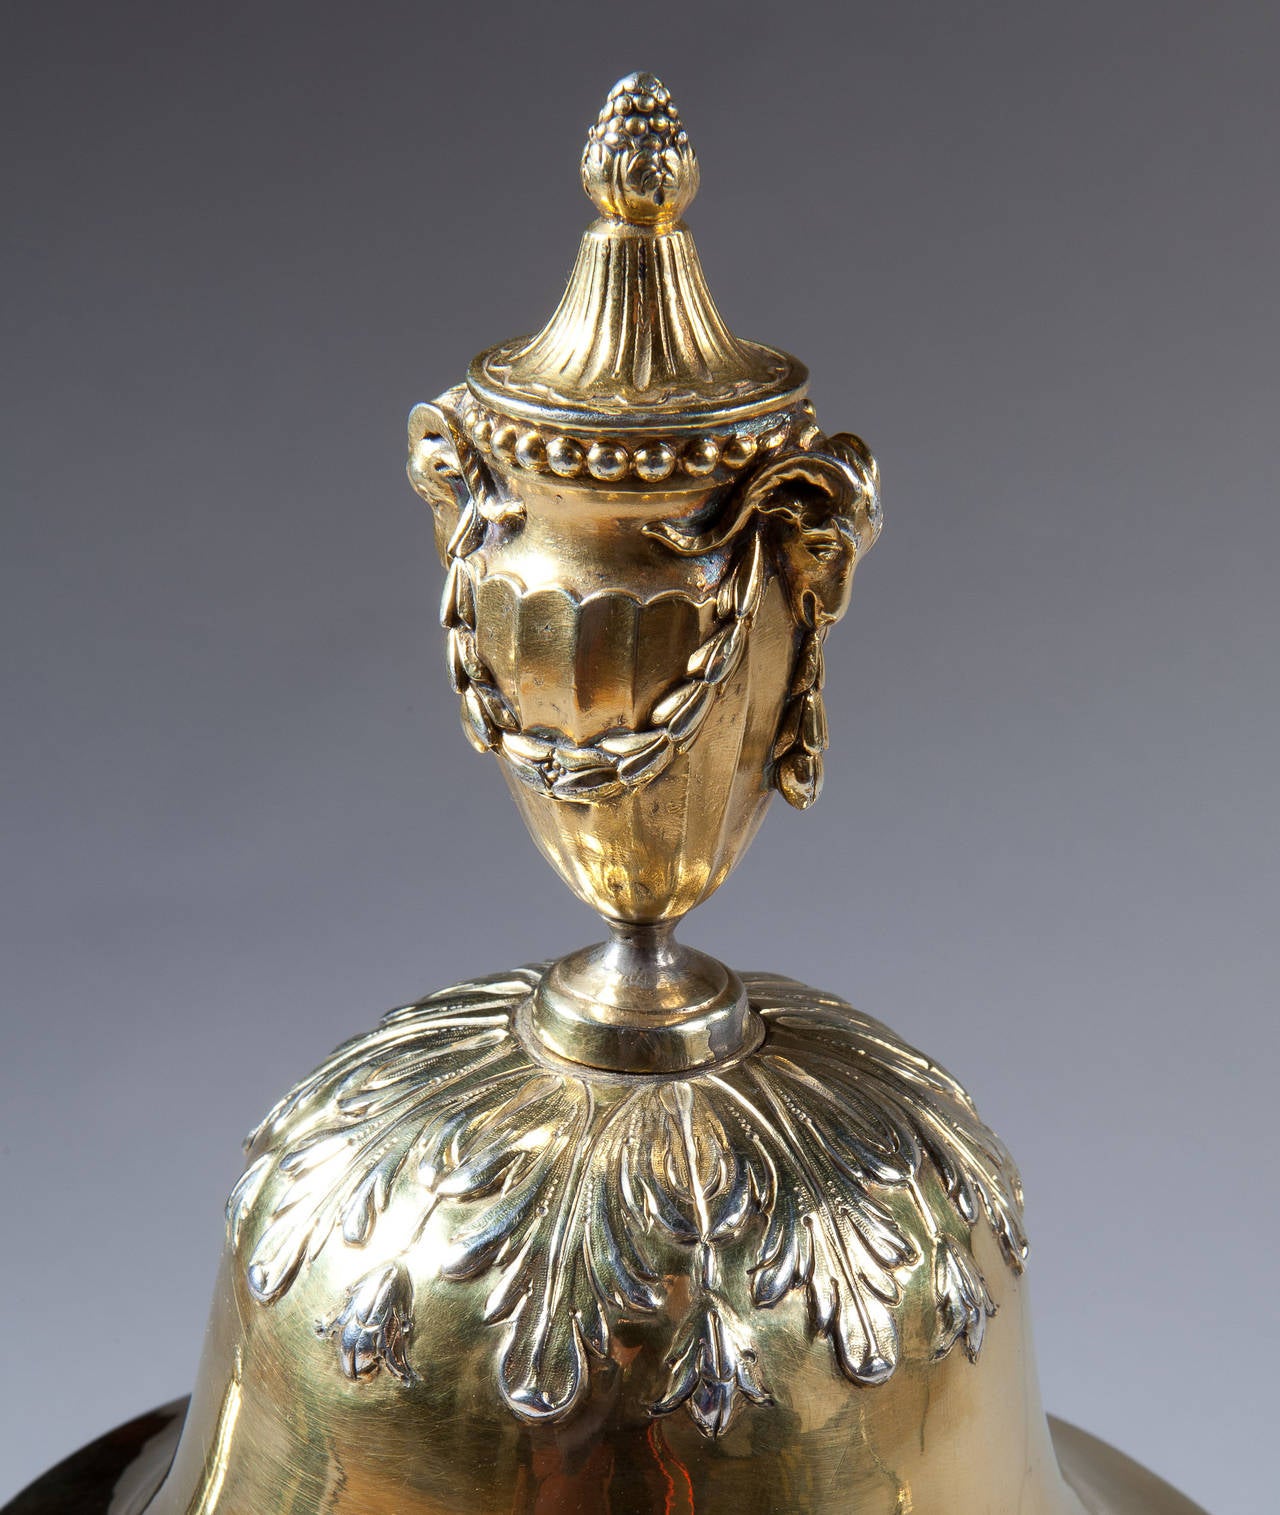 A rare and important Scottish Adam period silver gilt trophy vase and cover. Each element worked in fine detail and bedecked with neo-classical ornament.